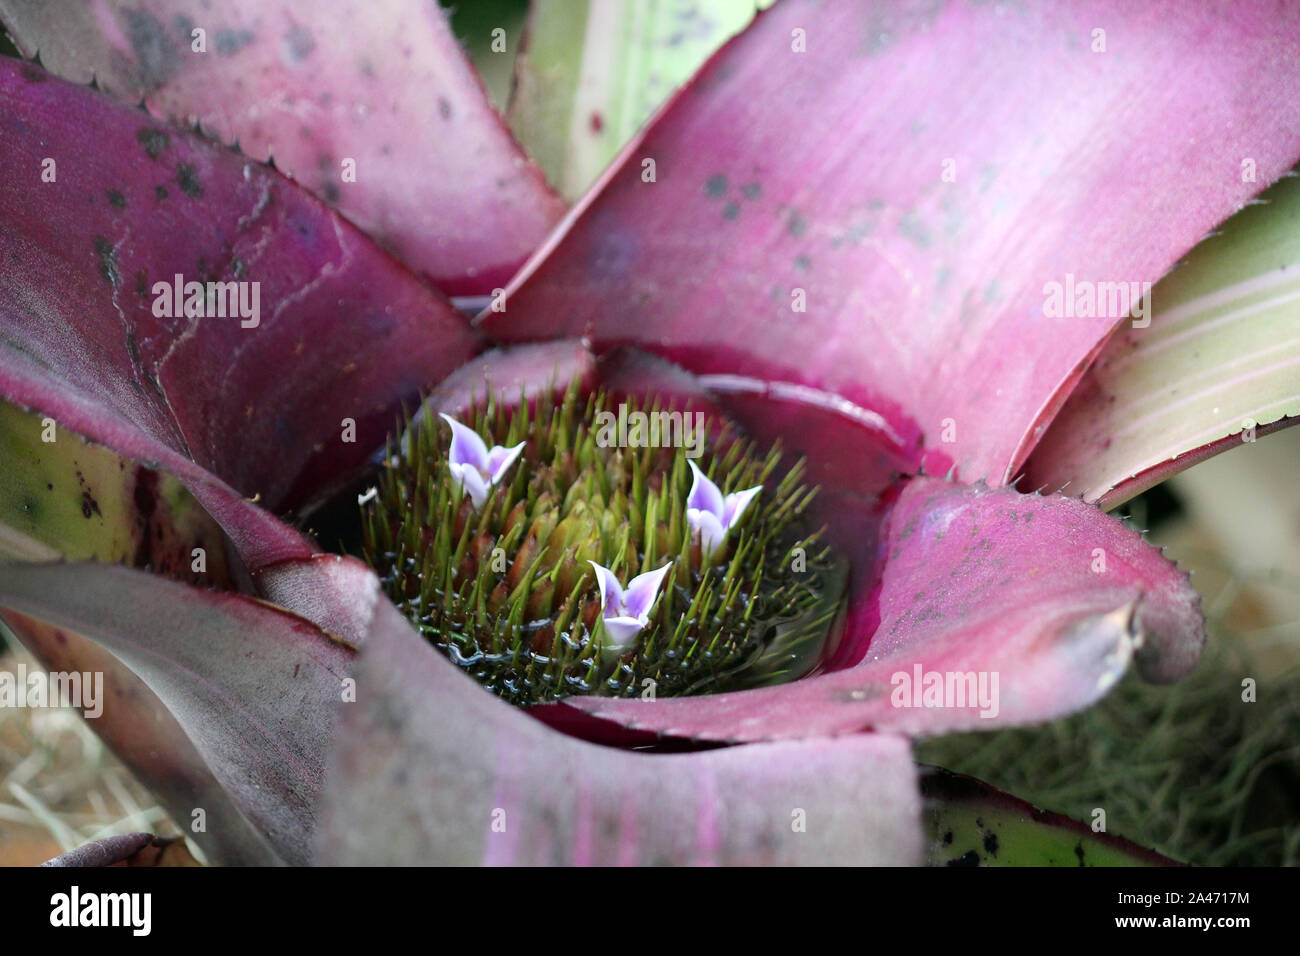 The cup area of a Silver Chalice Bromeliad plant filled with green spikes and small purple flowers Stock Photo